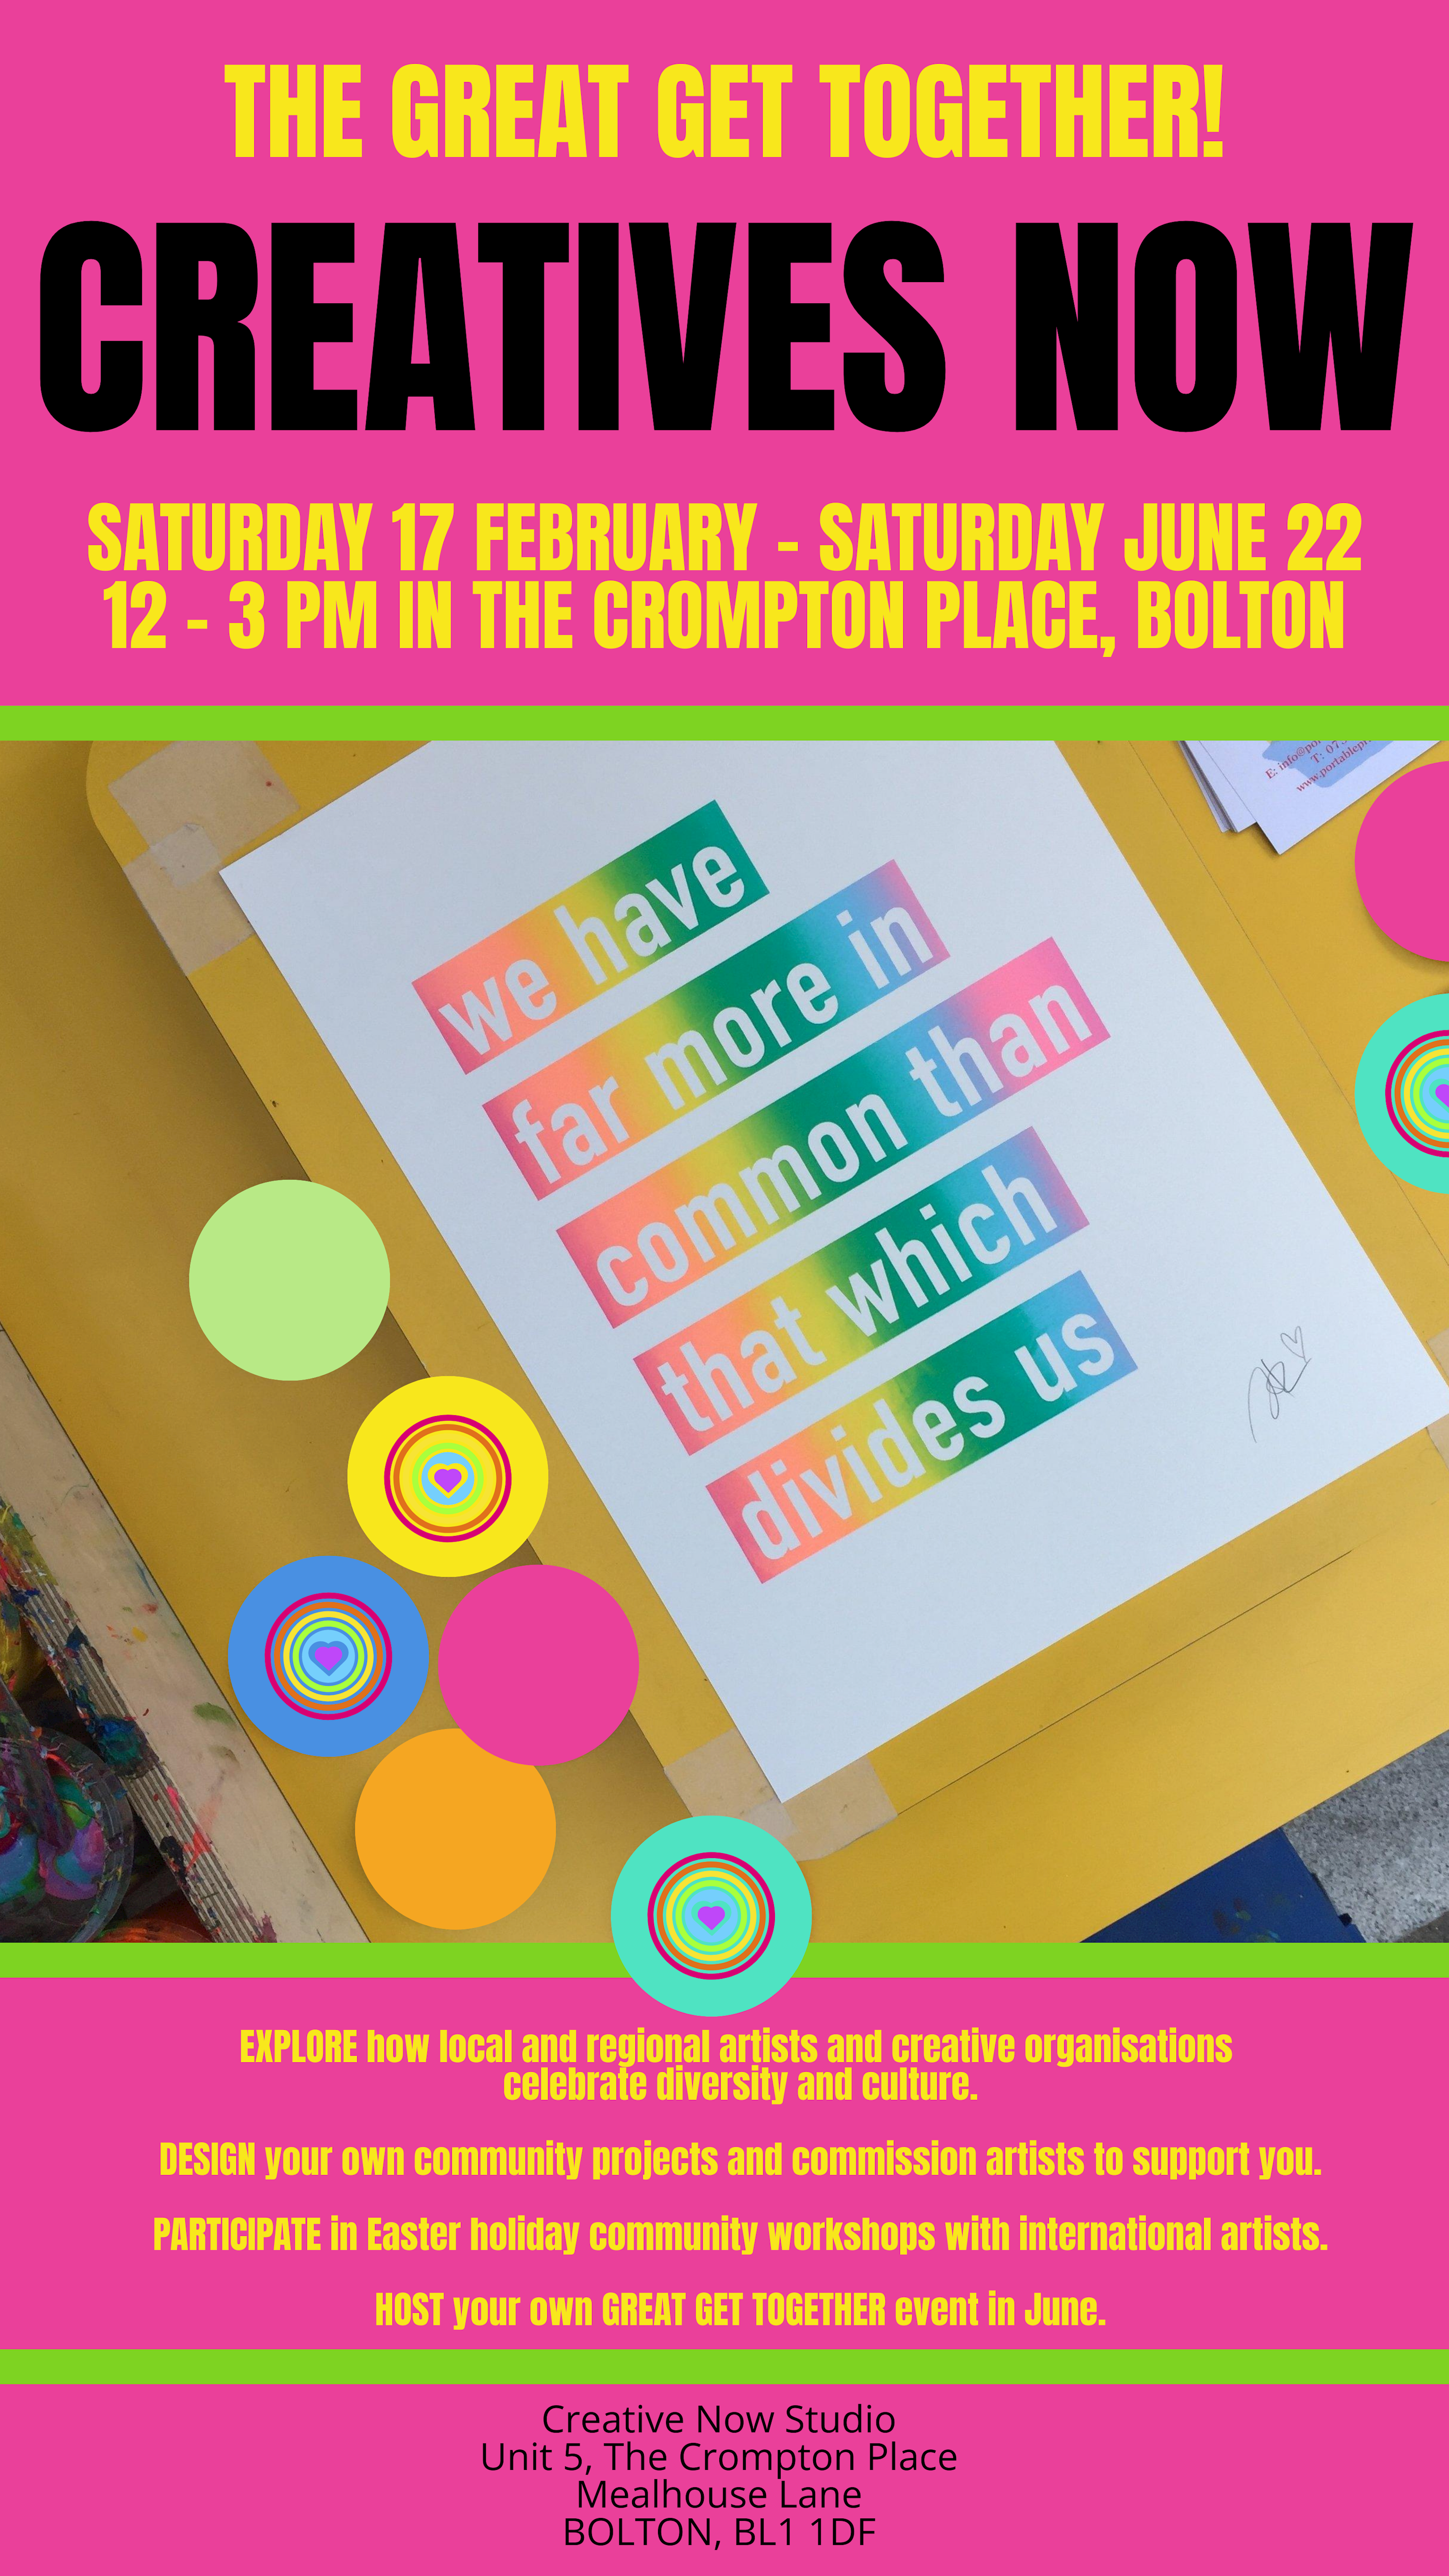 Colourful poster with test that reads: The Great Get Together! Creatives Now. Saturday 17 February - Saturday 22 June 12-3pm in The Crompton Place, Bolton. Central to the poster is a photo of decorative rainbow text art, which reads: “We have far more in common than that which divides us.” Below the photo, text continues: EXPLORE how local and regional artists and creative organisations celebrate diversity and culture. DESIGN your own community projects and commission artists to support you. PARTICIPATE in Easter holiday community workshops with international artists. HOST your own GREAT GET TOGETHER event in June. Creative Now Studio, Unit 5 The Crompton Place, Mealhouse Lane, Bolton, BL1 1DF.